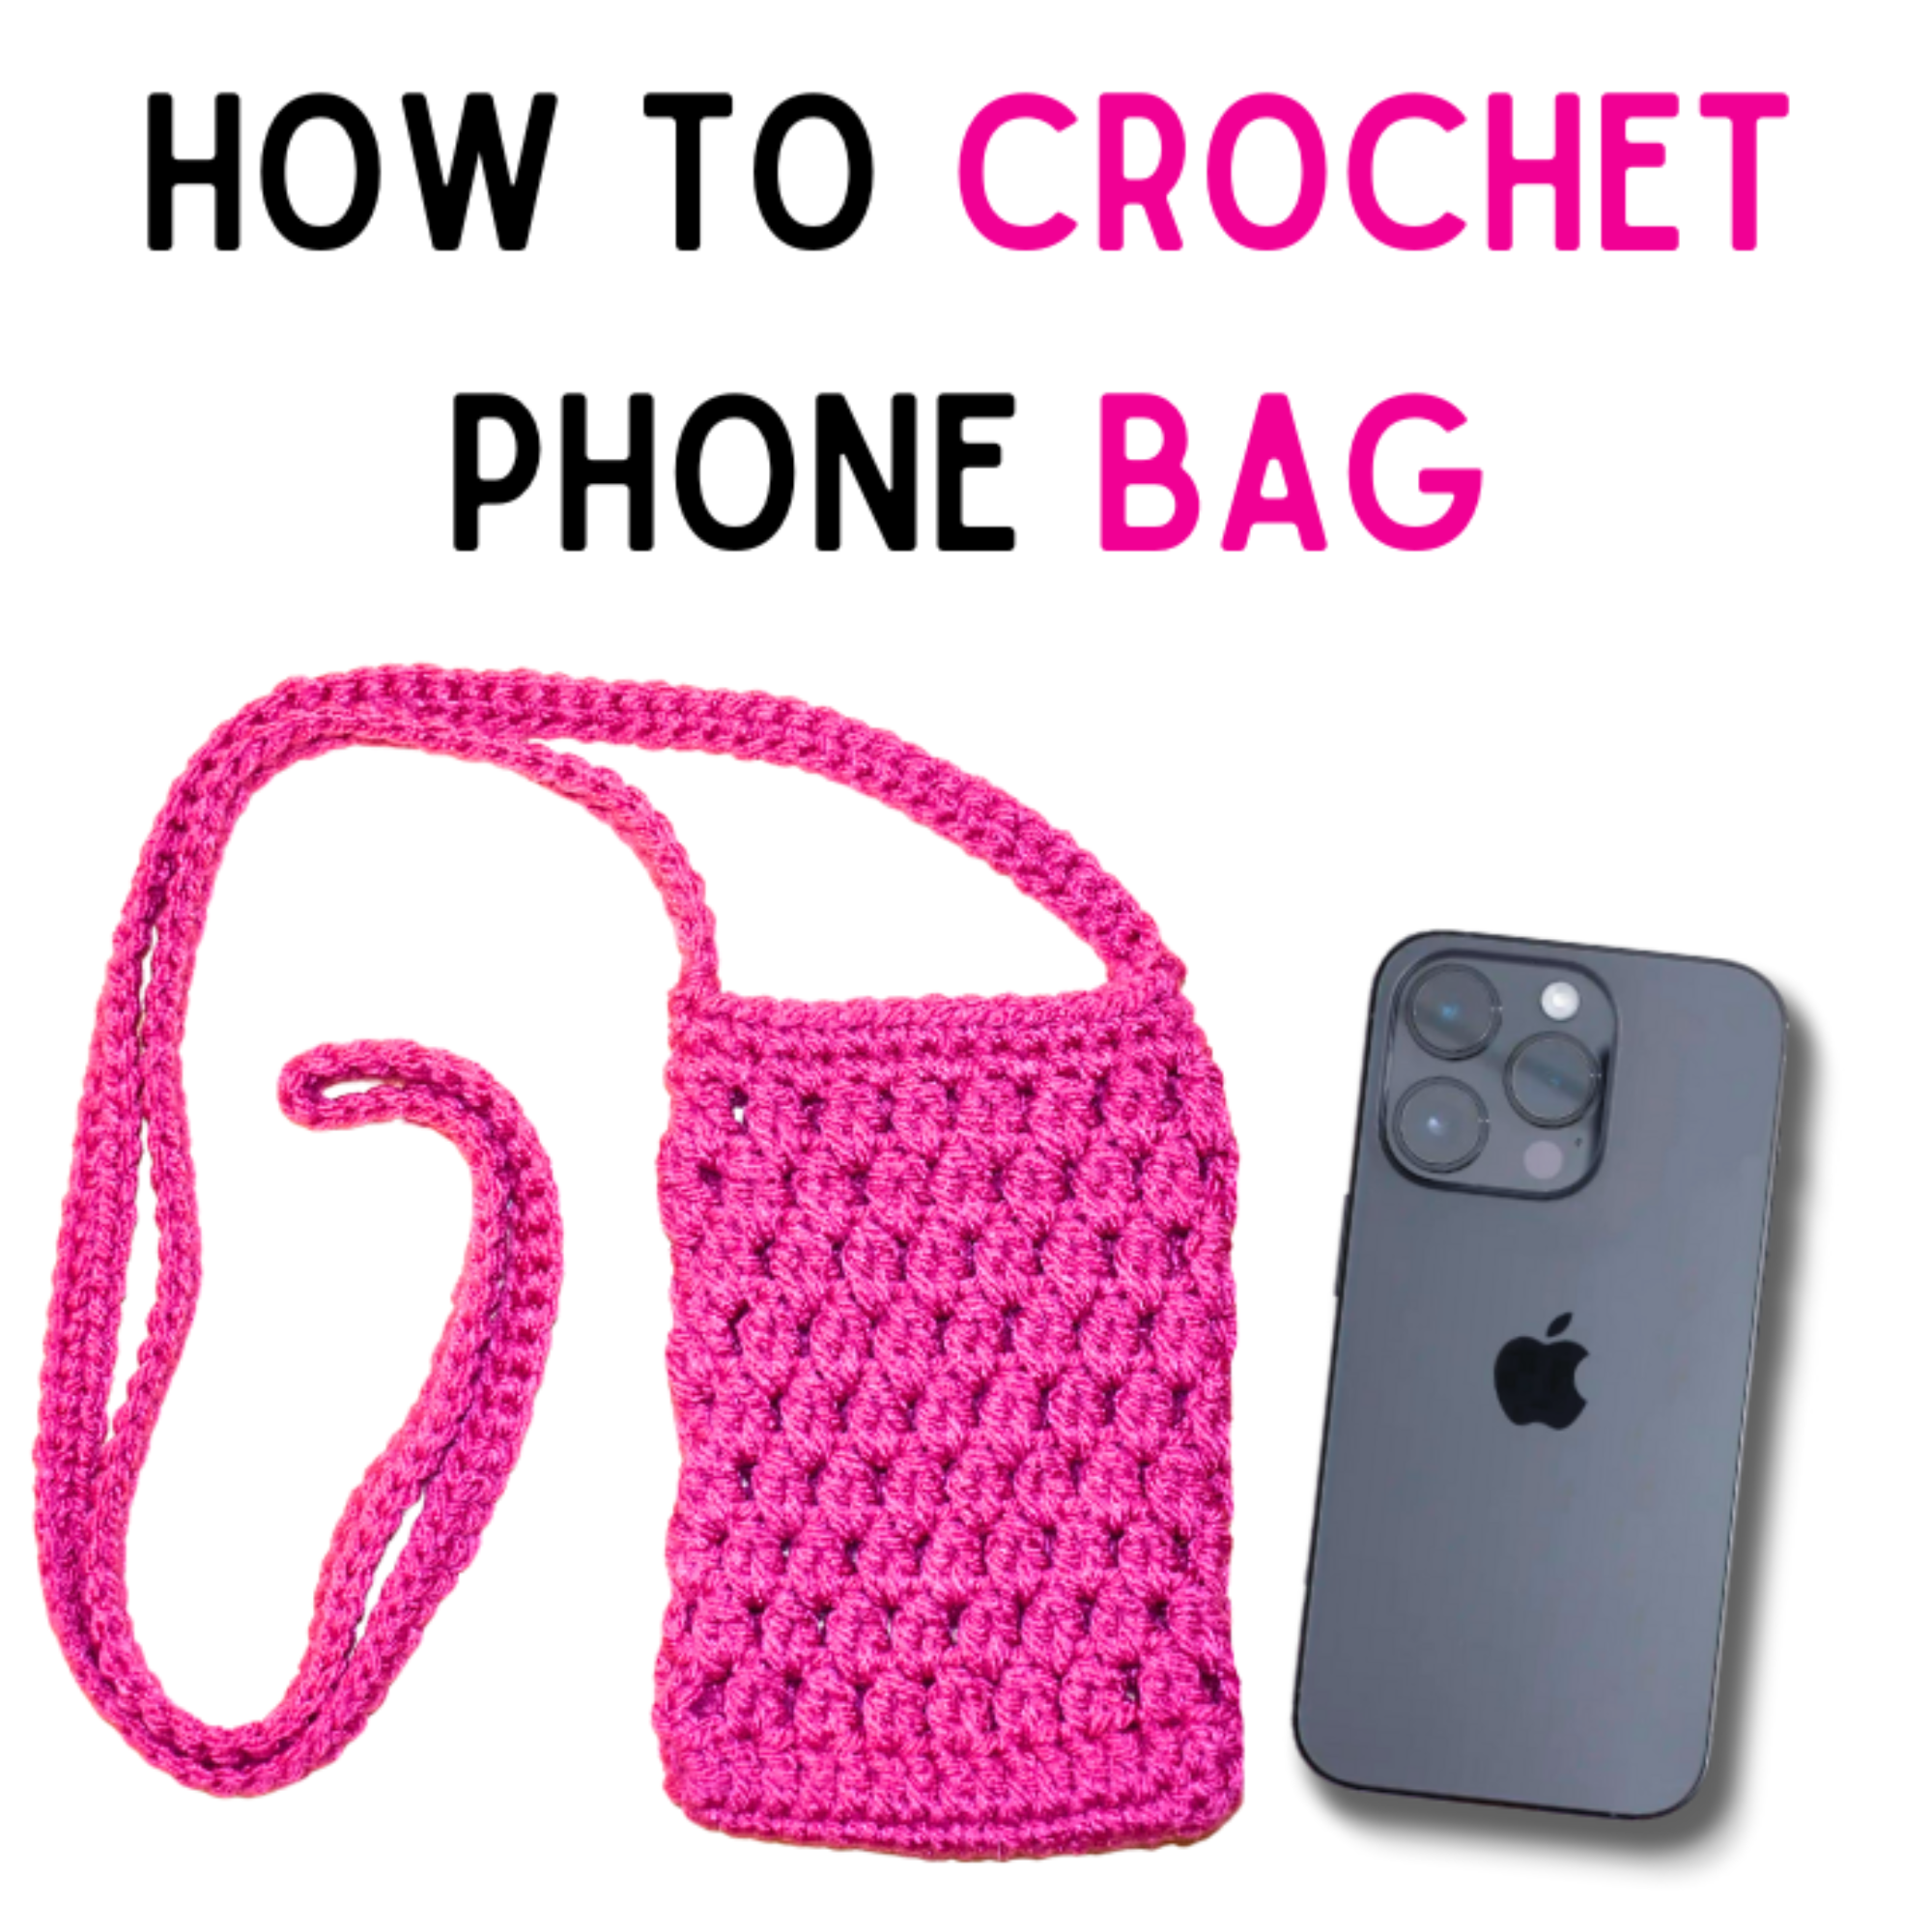 How to Crochet a Phone Bag